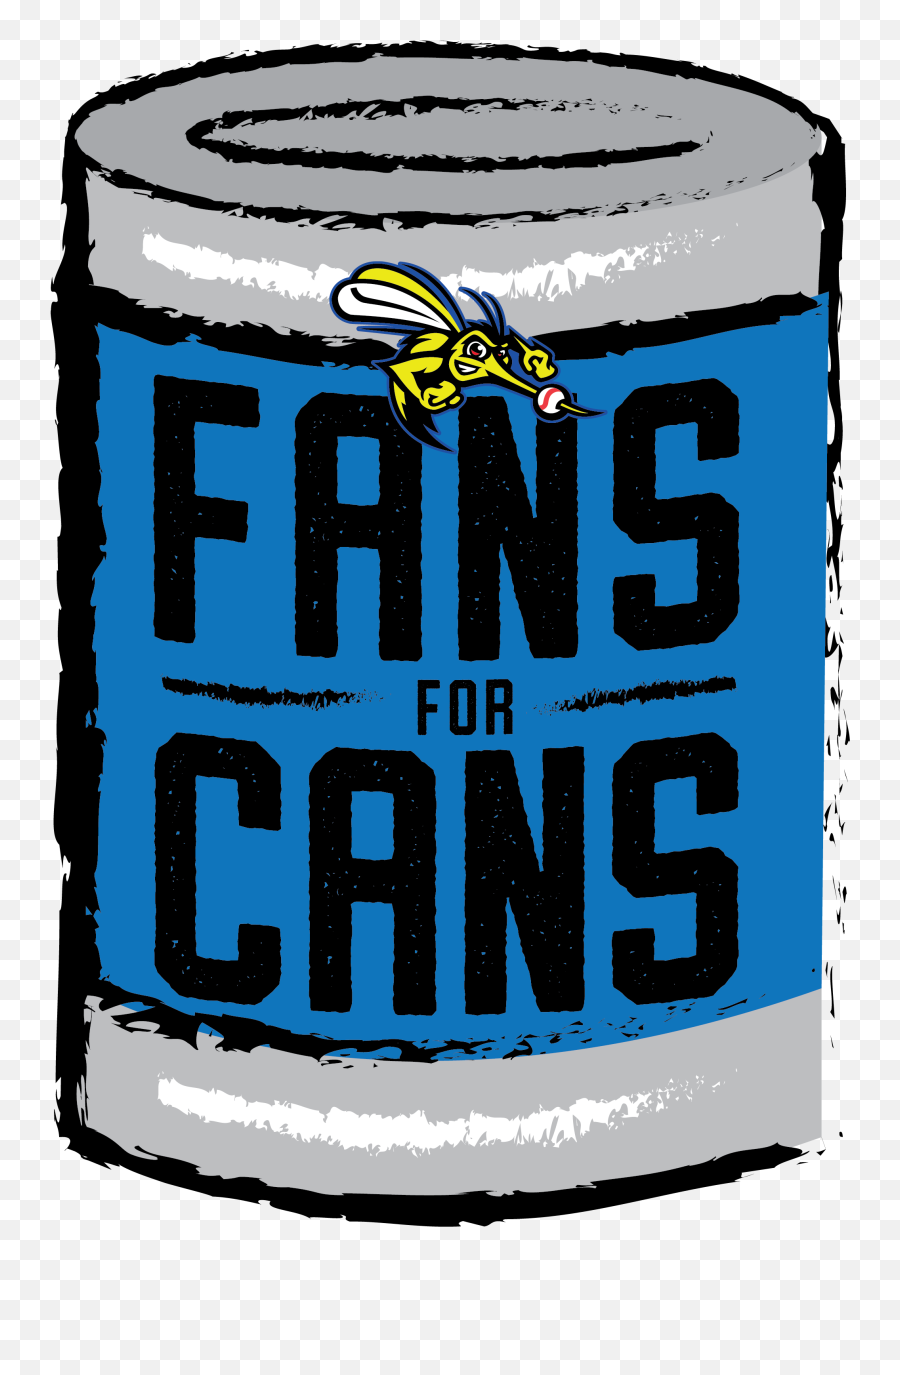 Fans For Cans Food Drive - Cylinder Emoji,Food Drive Clipart